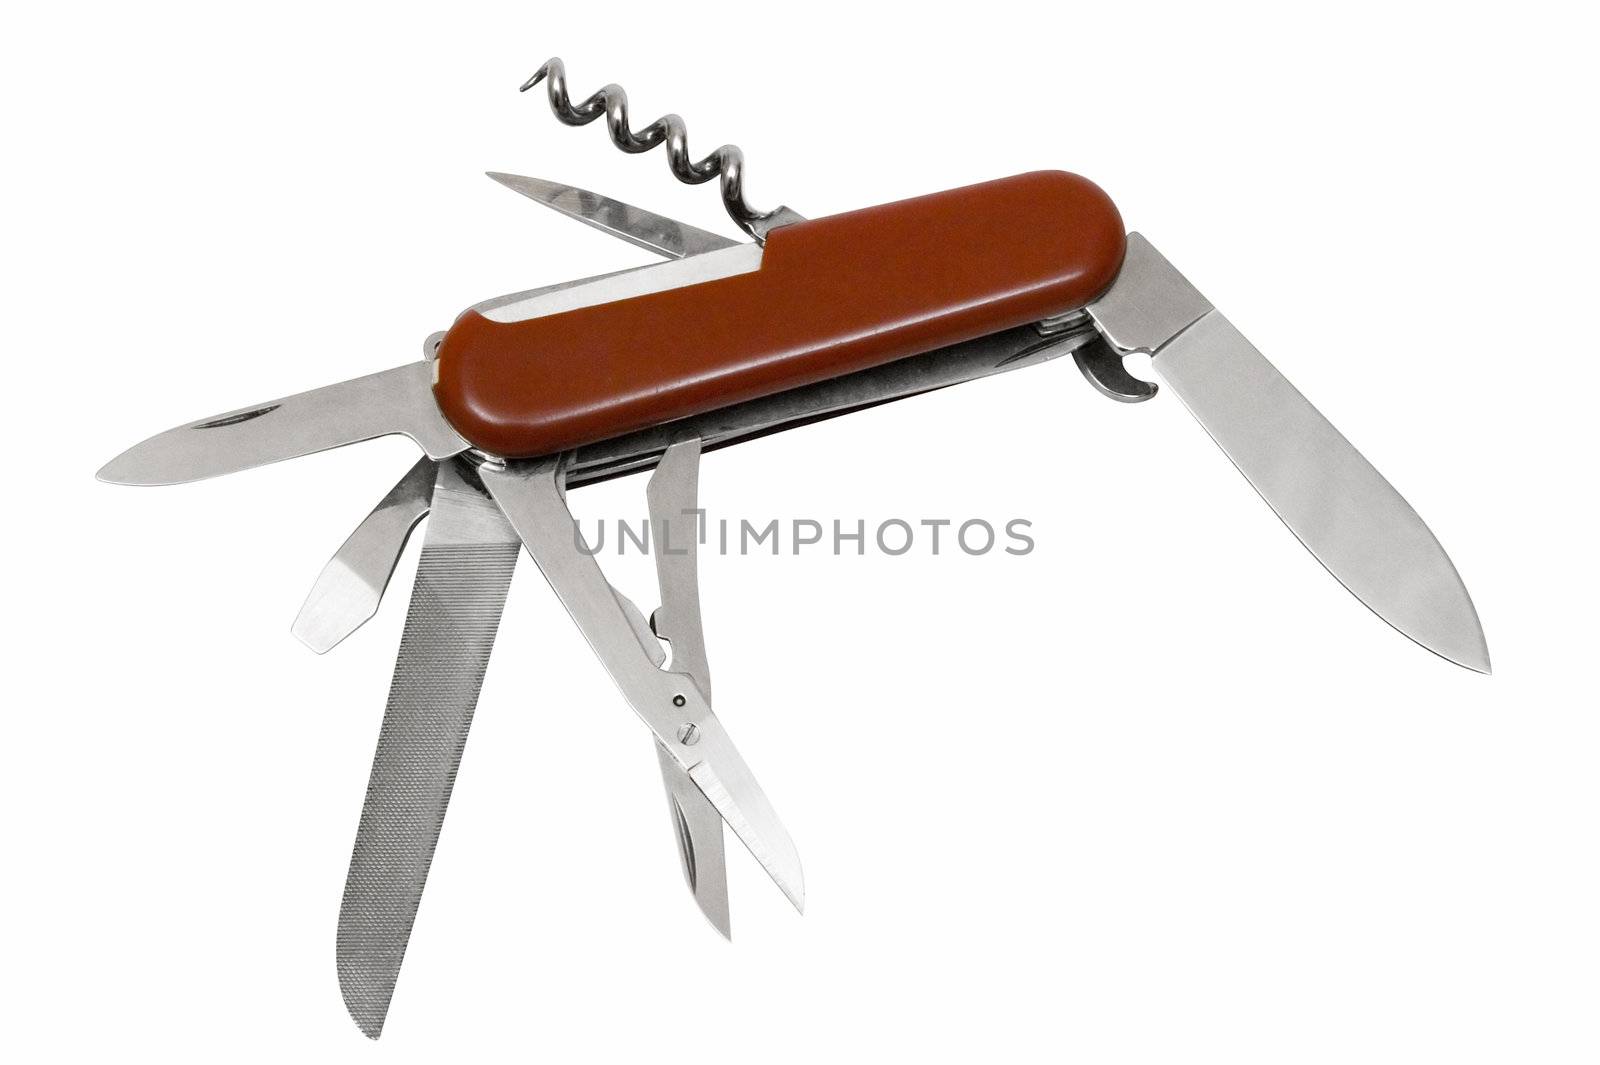 Multitool Penknife with Clipping Path by winterling